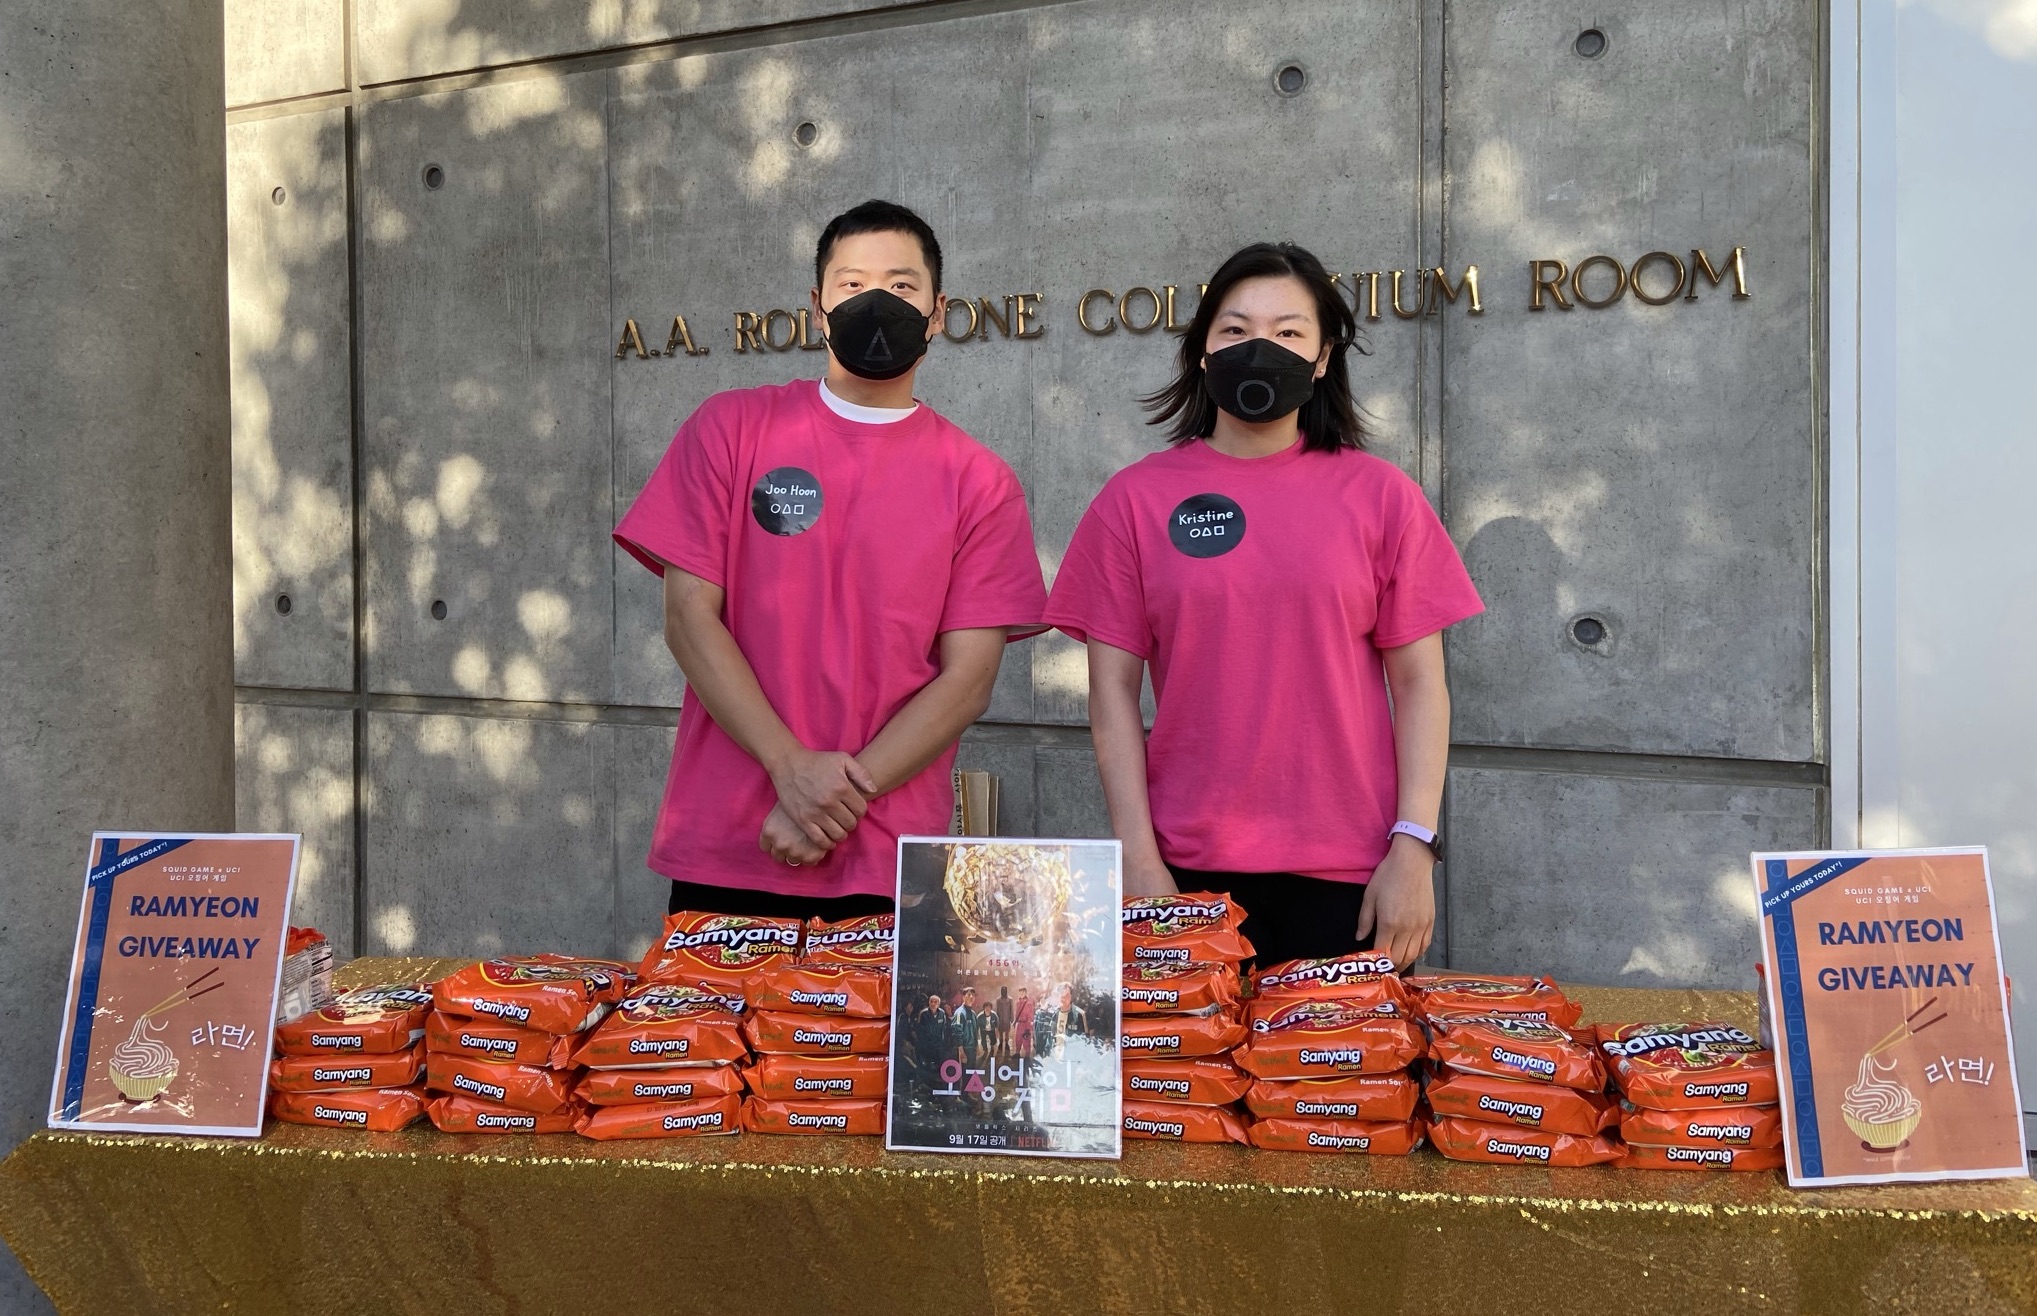 Two students wear hot pink shirts and black face masks, emulating characters in Squid Game